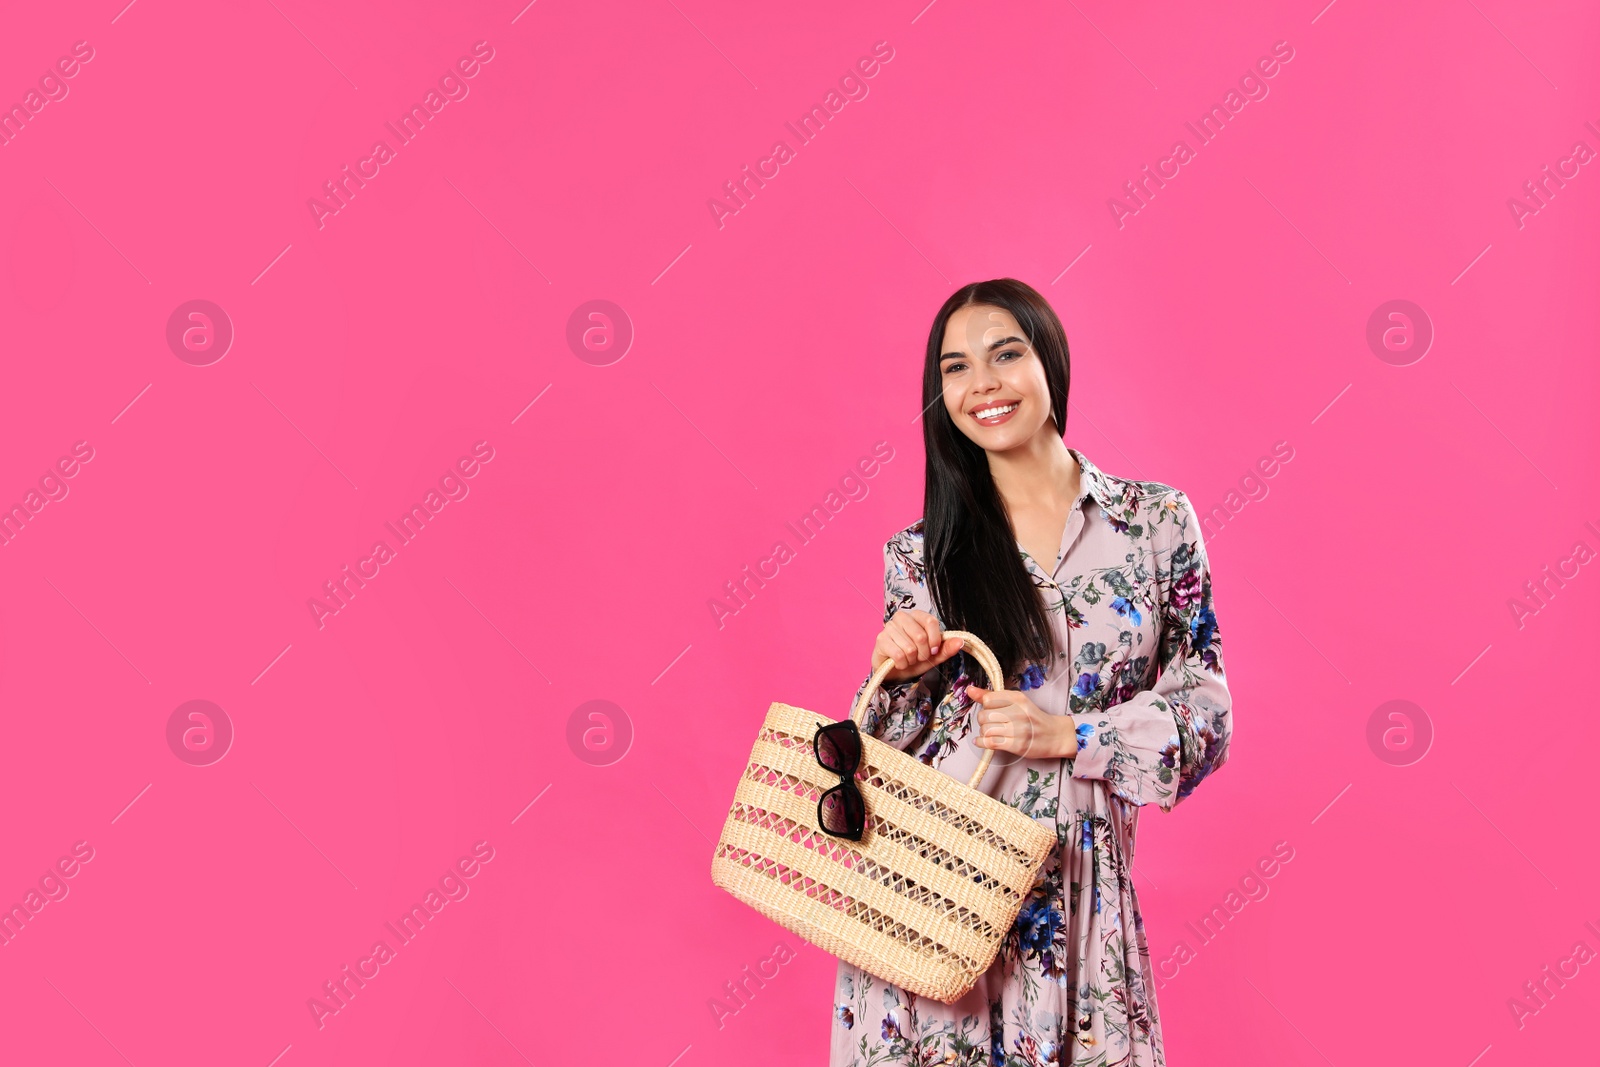 Photo of Young woman wearing floral print dress with straw bag on pink background. Space for text